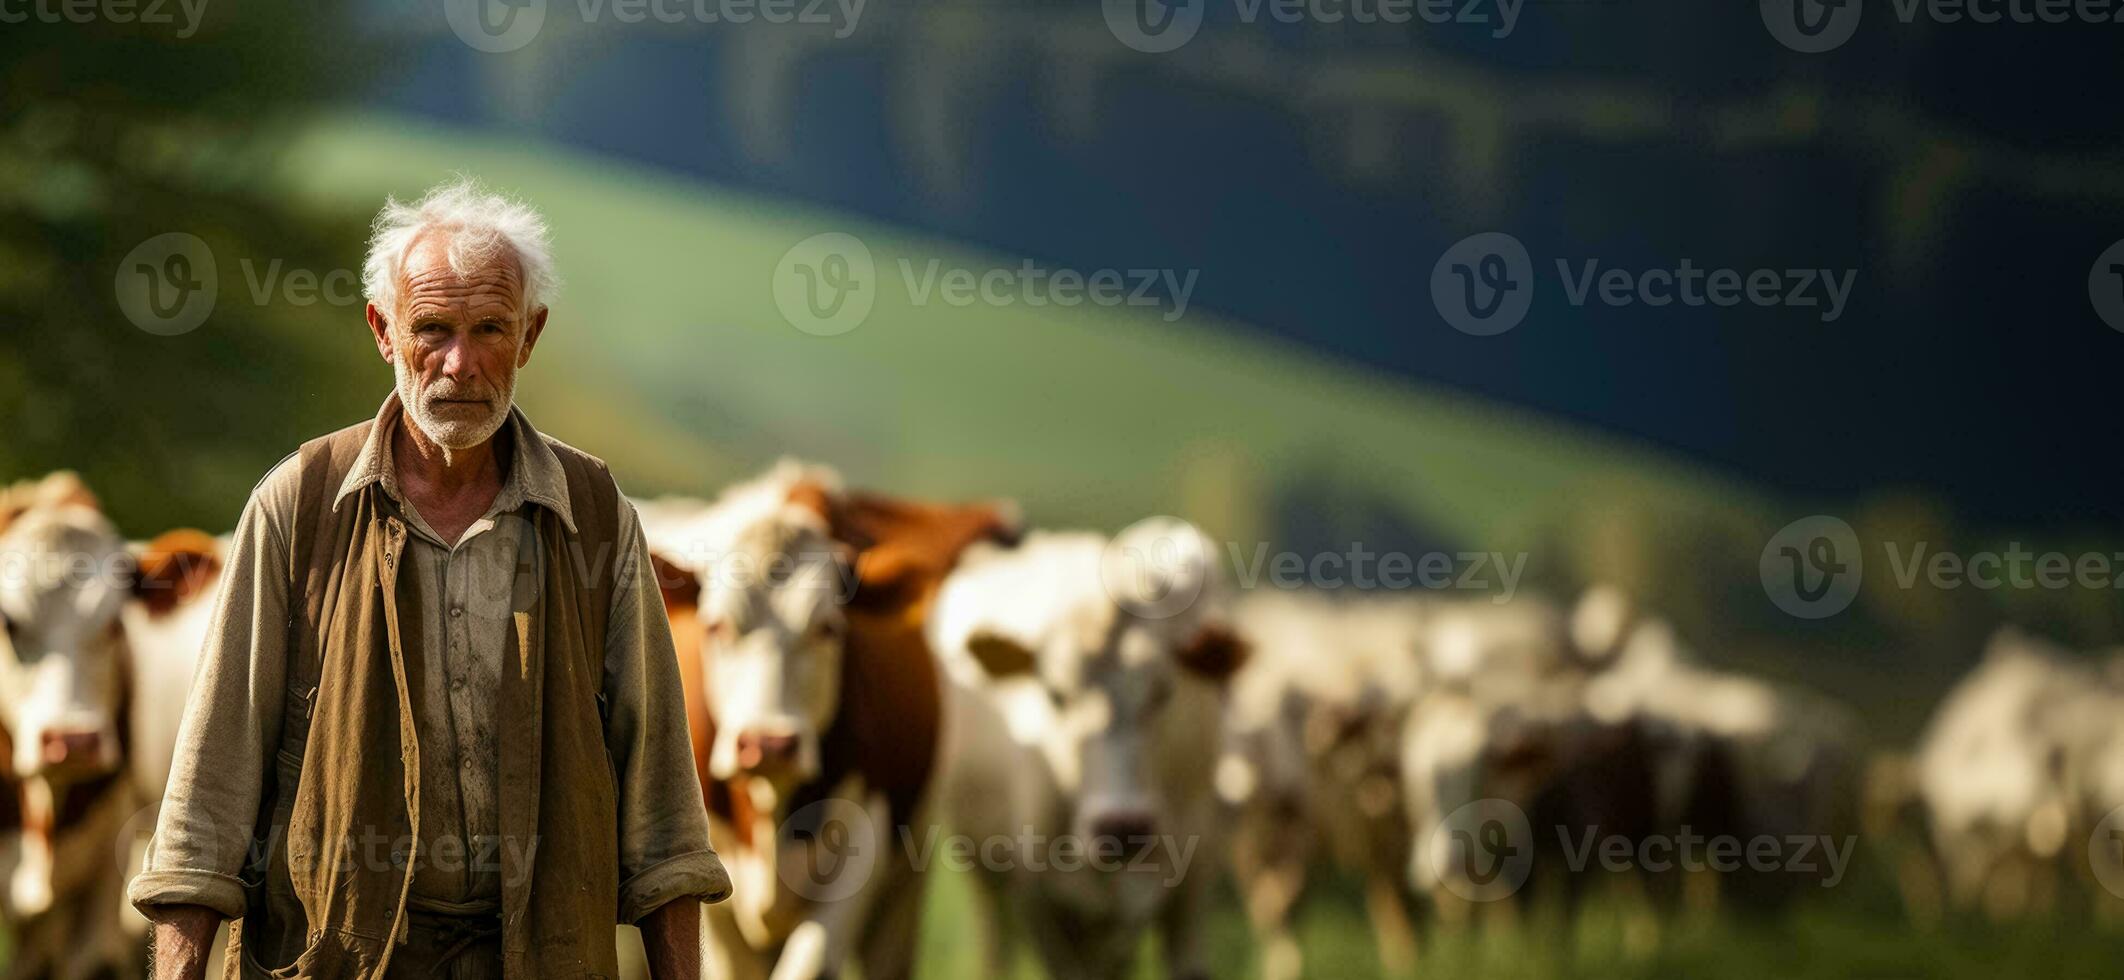 Frustrated farmer pulls on stubborn cows leash as other livestock peers on oblivious to his exasperation photo